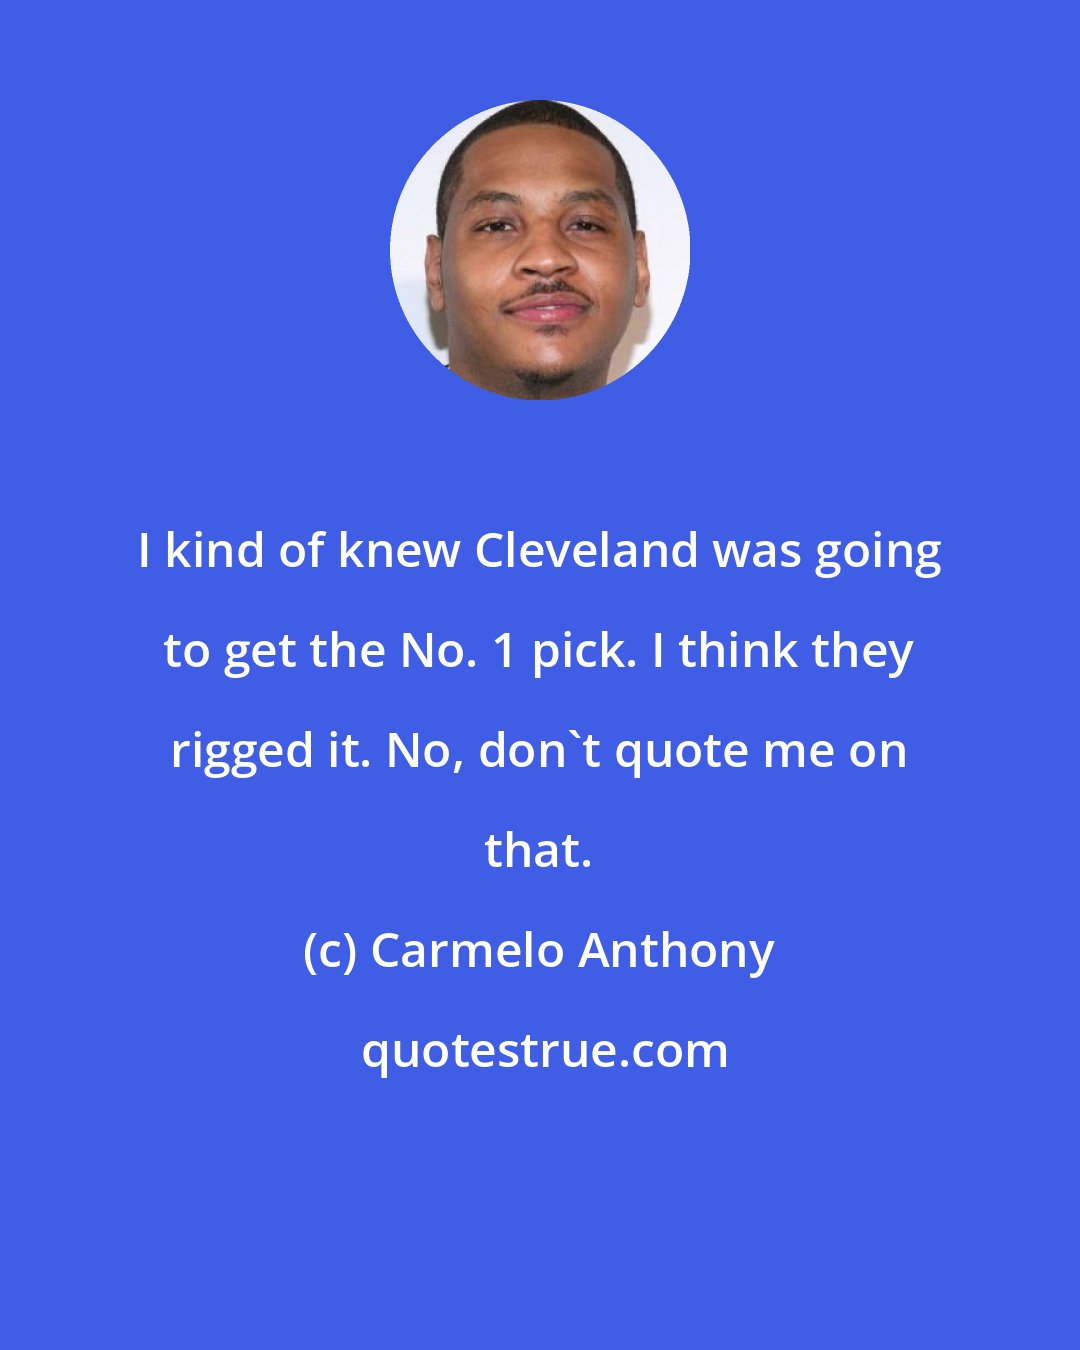 Carmelo Anthony: I kind of knew Cleveland was going to get the No. 1 pick. I think they rigged it. No, don't quote me on that.